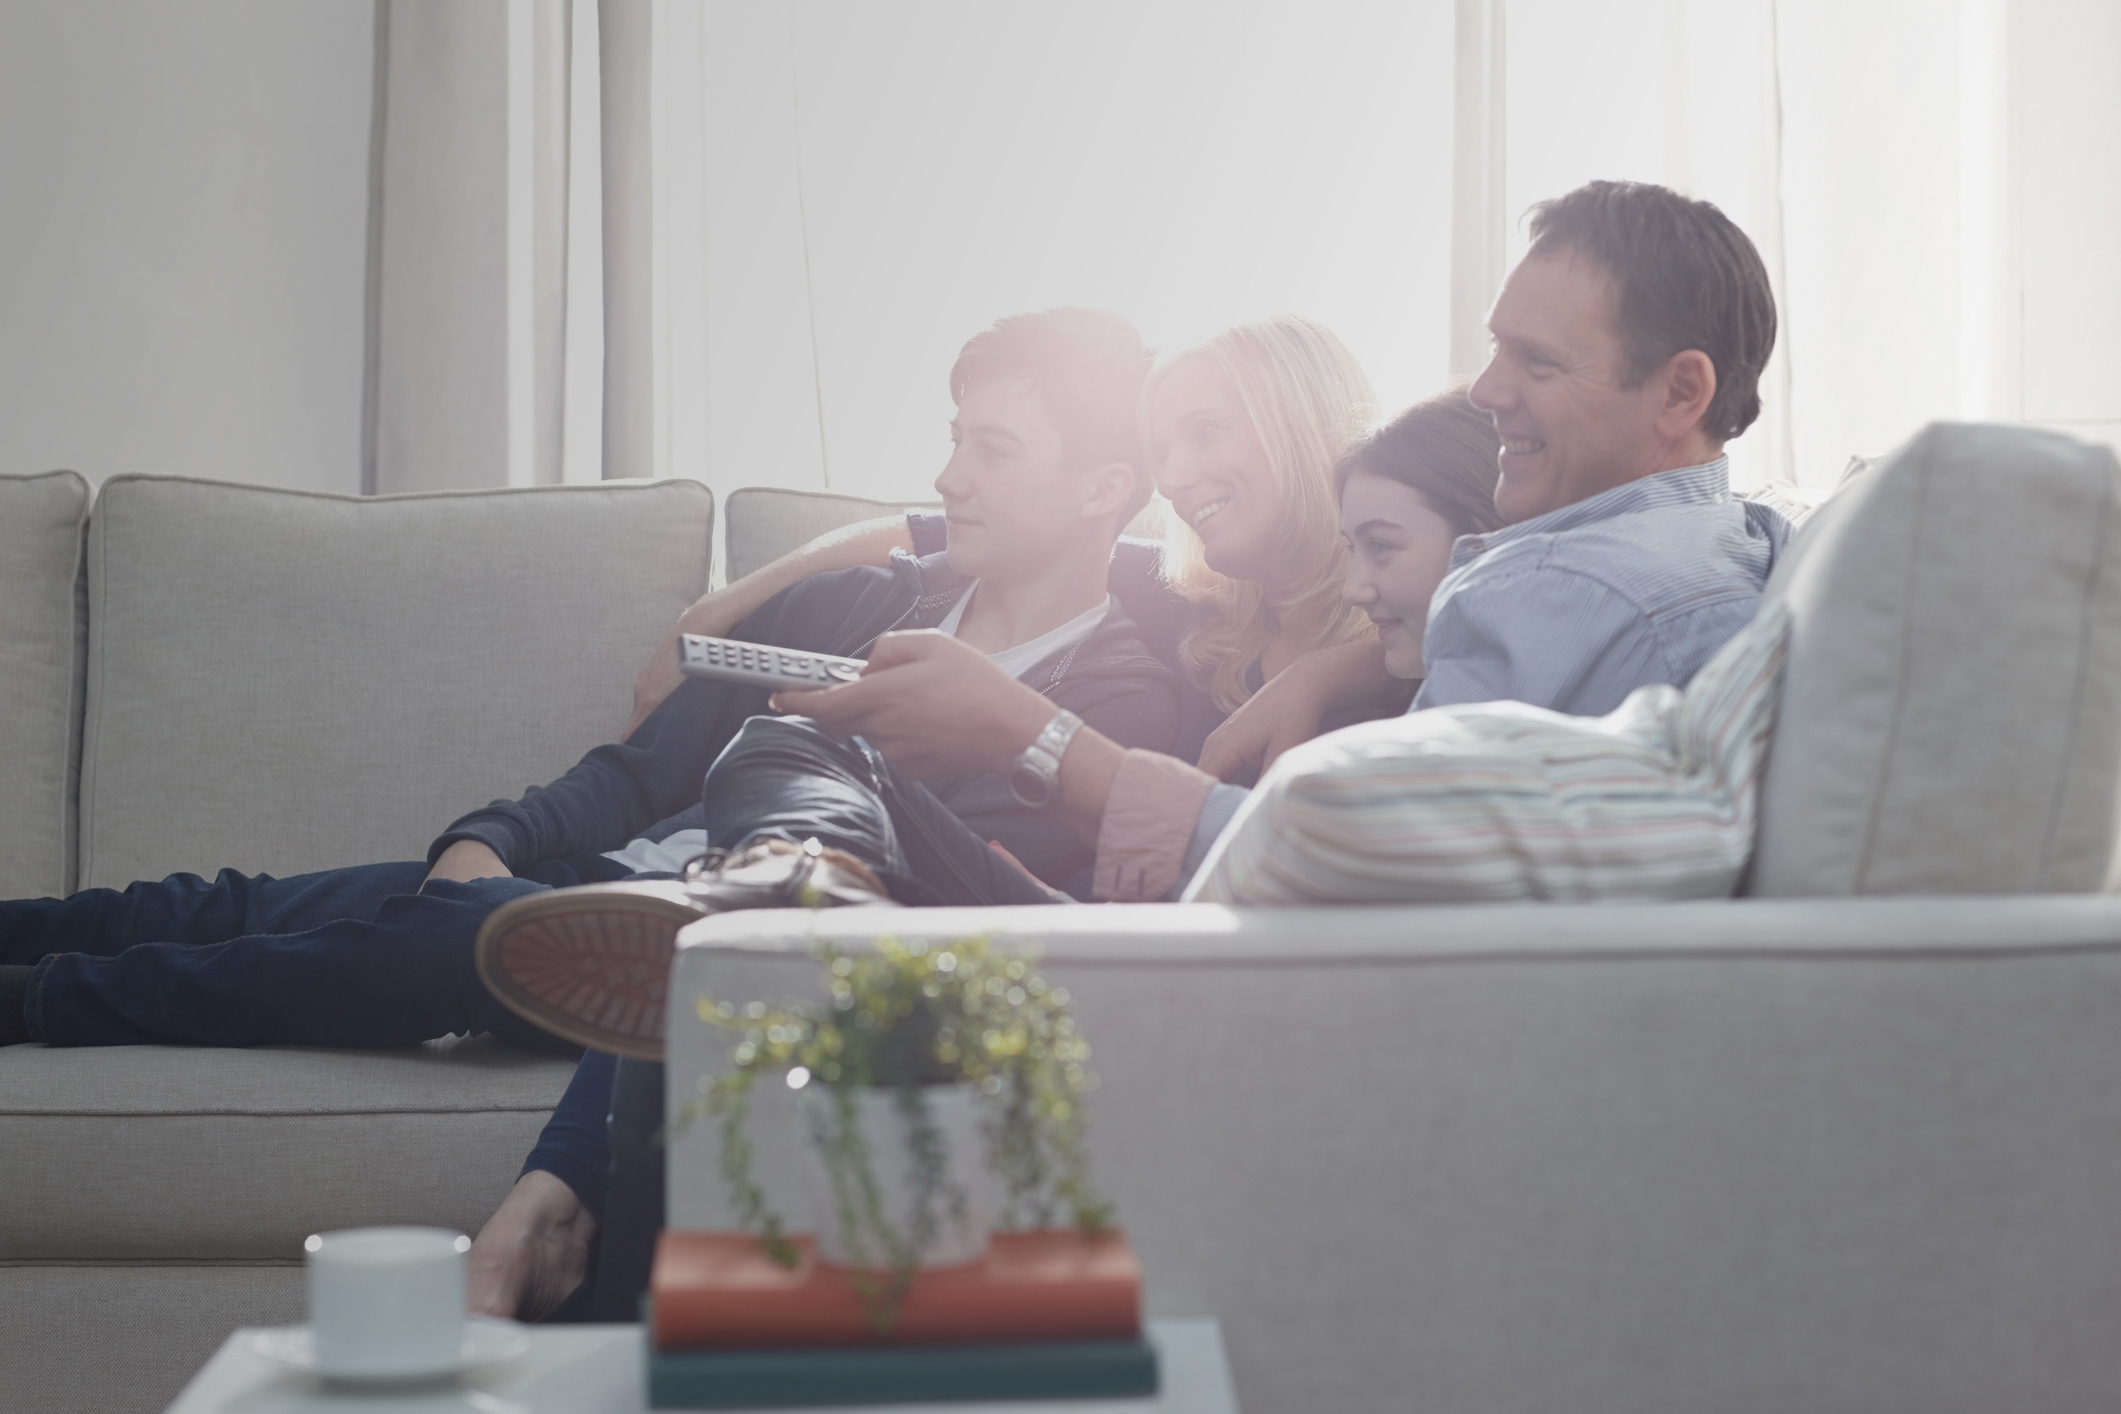 Family of four sitting together on sofa watching television – Indoors